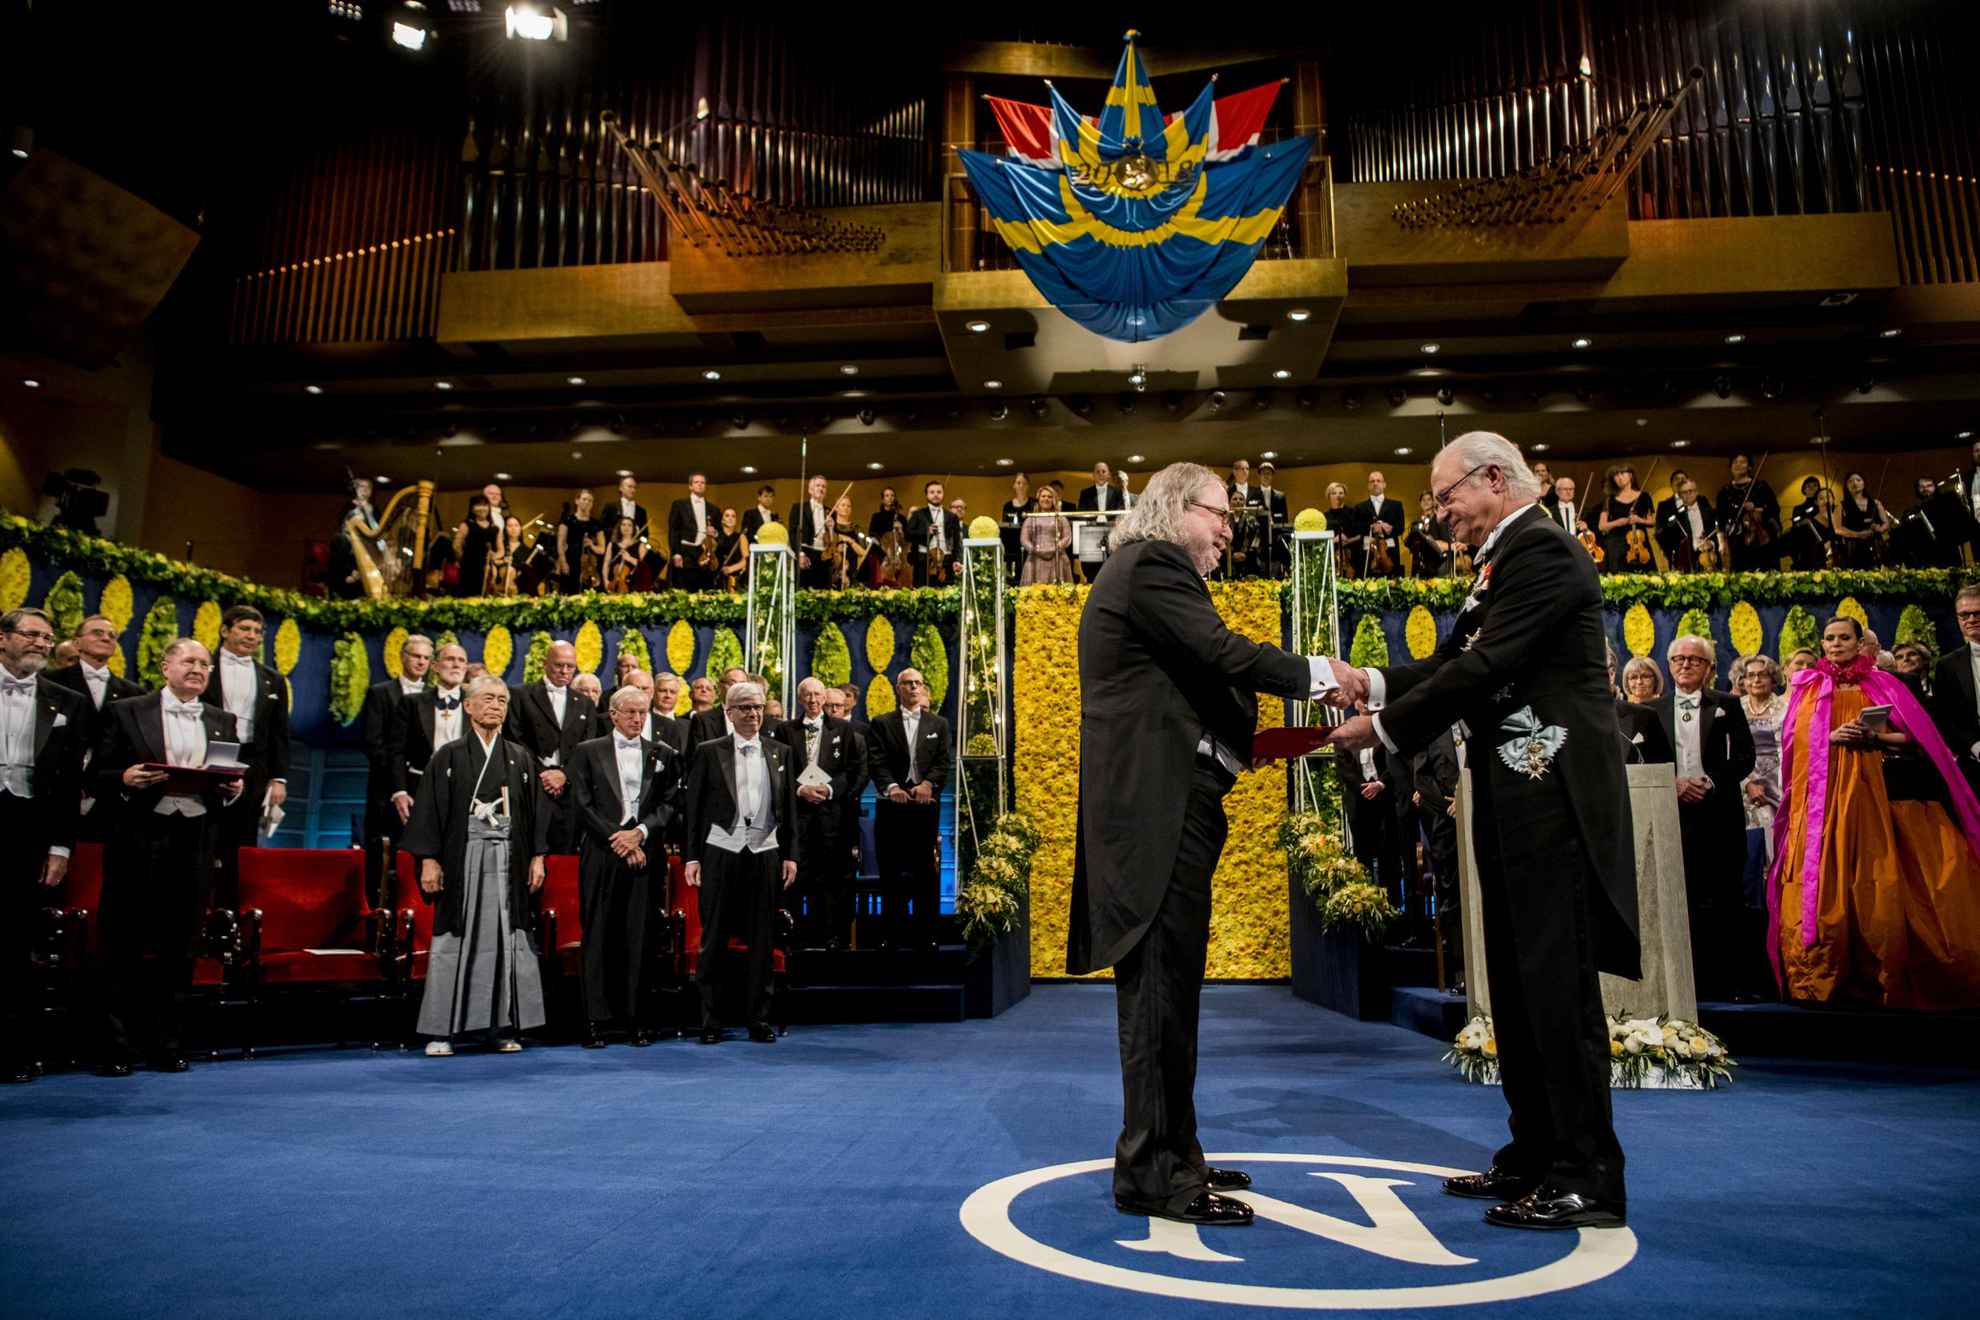 A male laureate is standing on a stage and receives his prize from the Swedish King Carl XVI Gustaf.